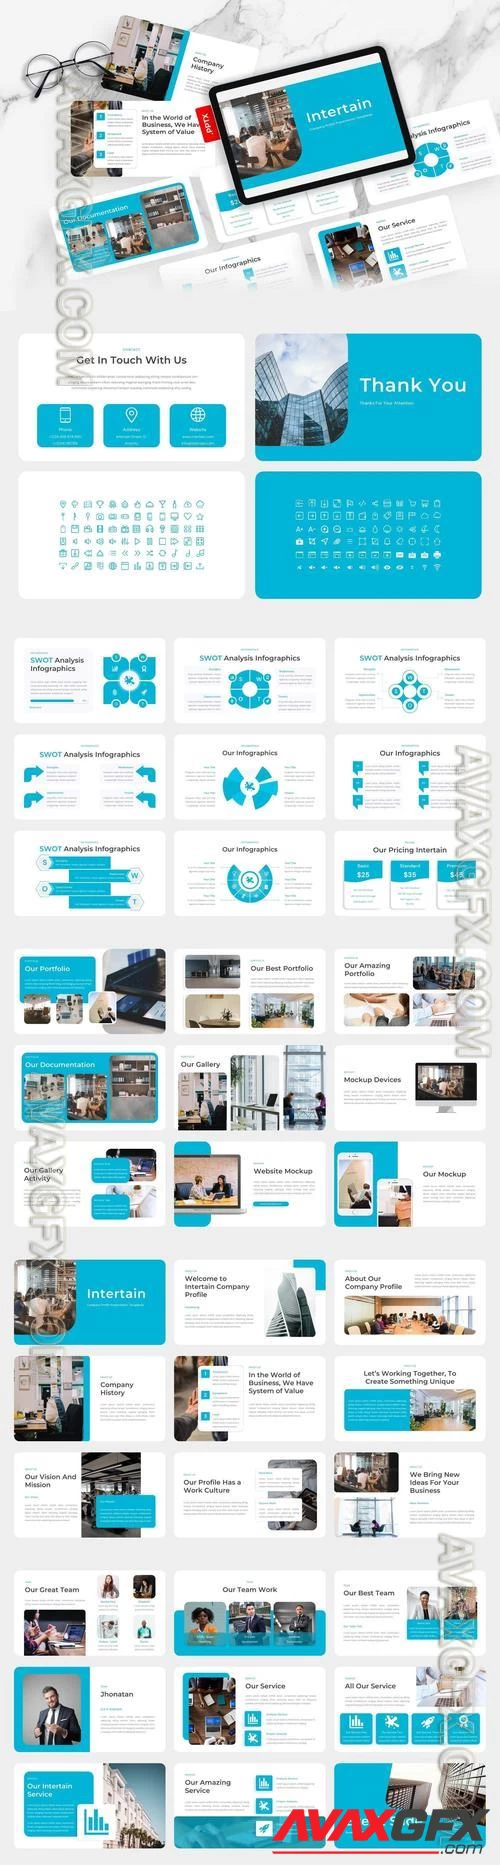 Intertain - Company Profile PowerPoint Template